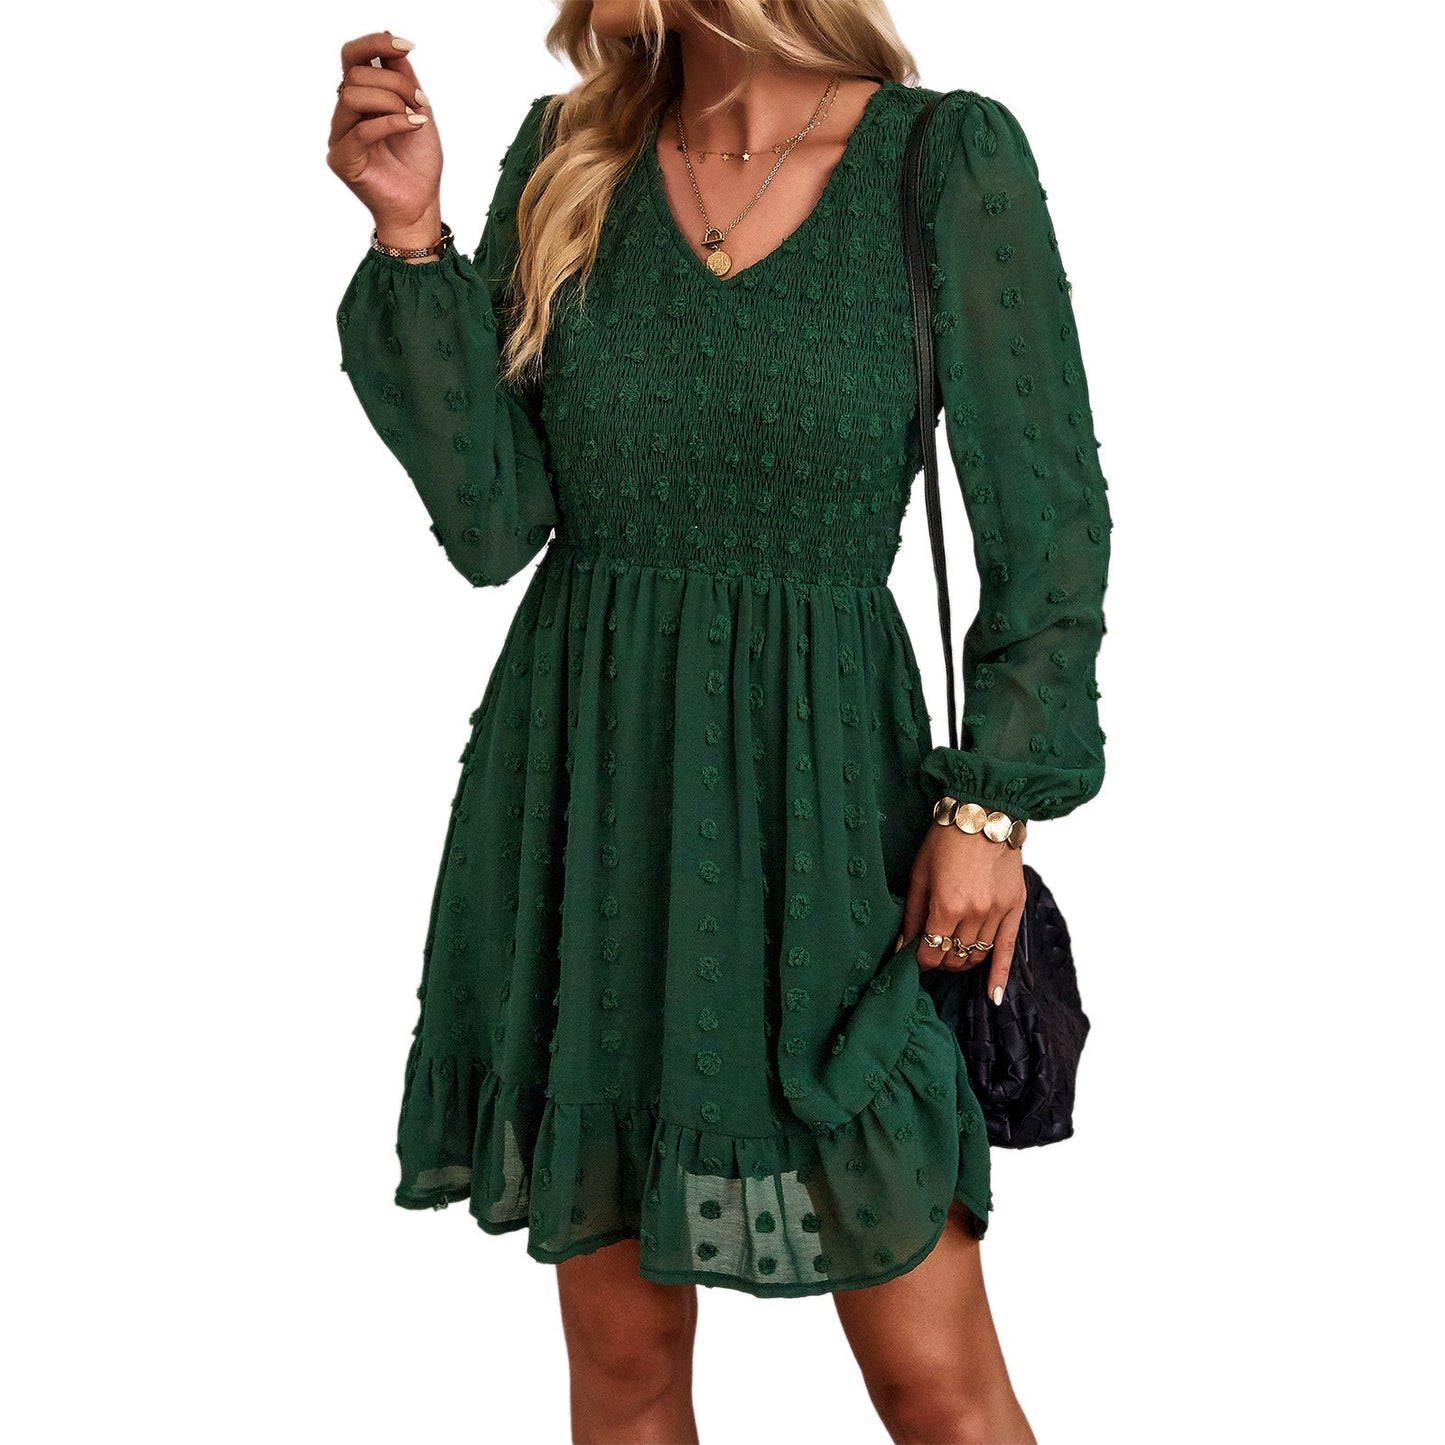 Casual Long Sleeves Short Daily Dresses-Dresses-White-S-Free Shipping Leatheretro